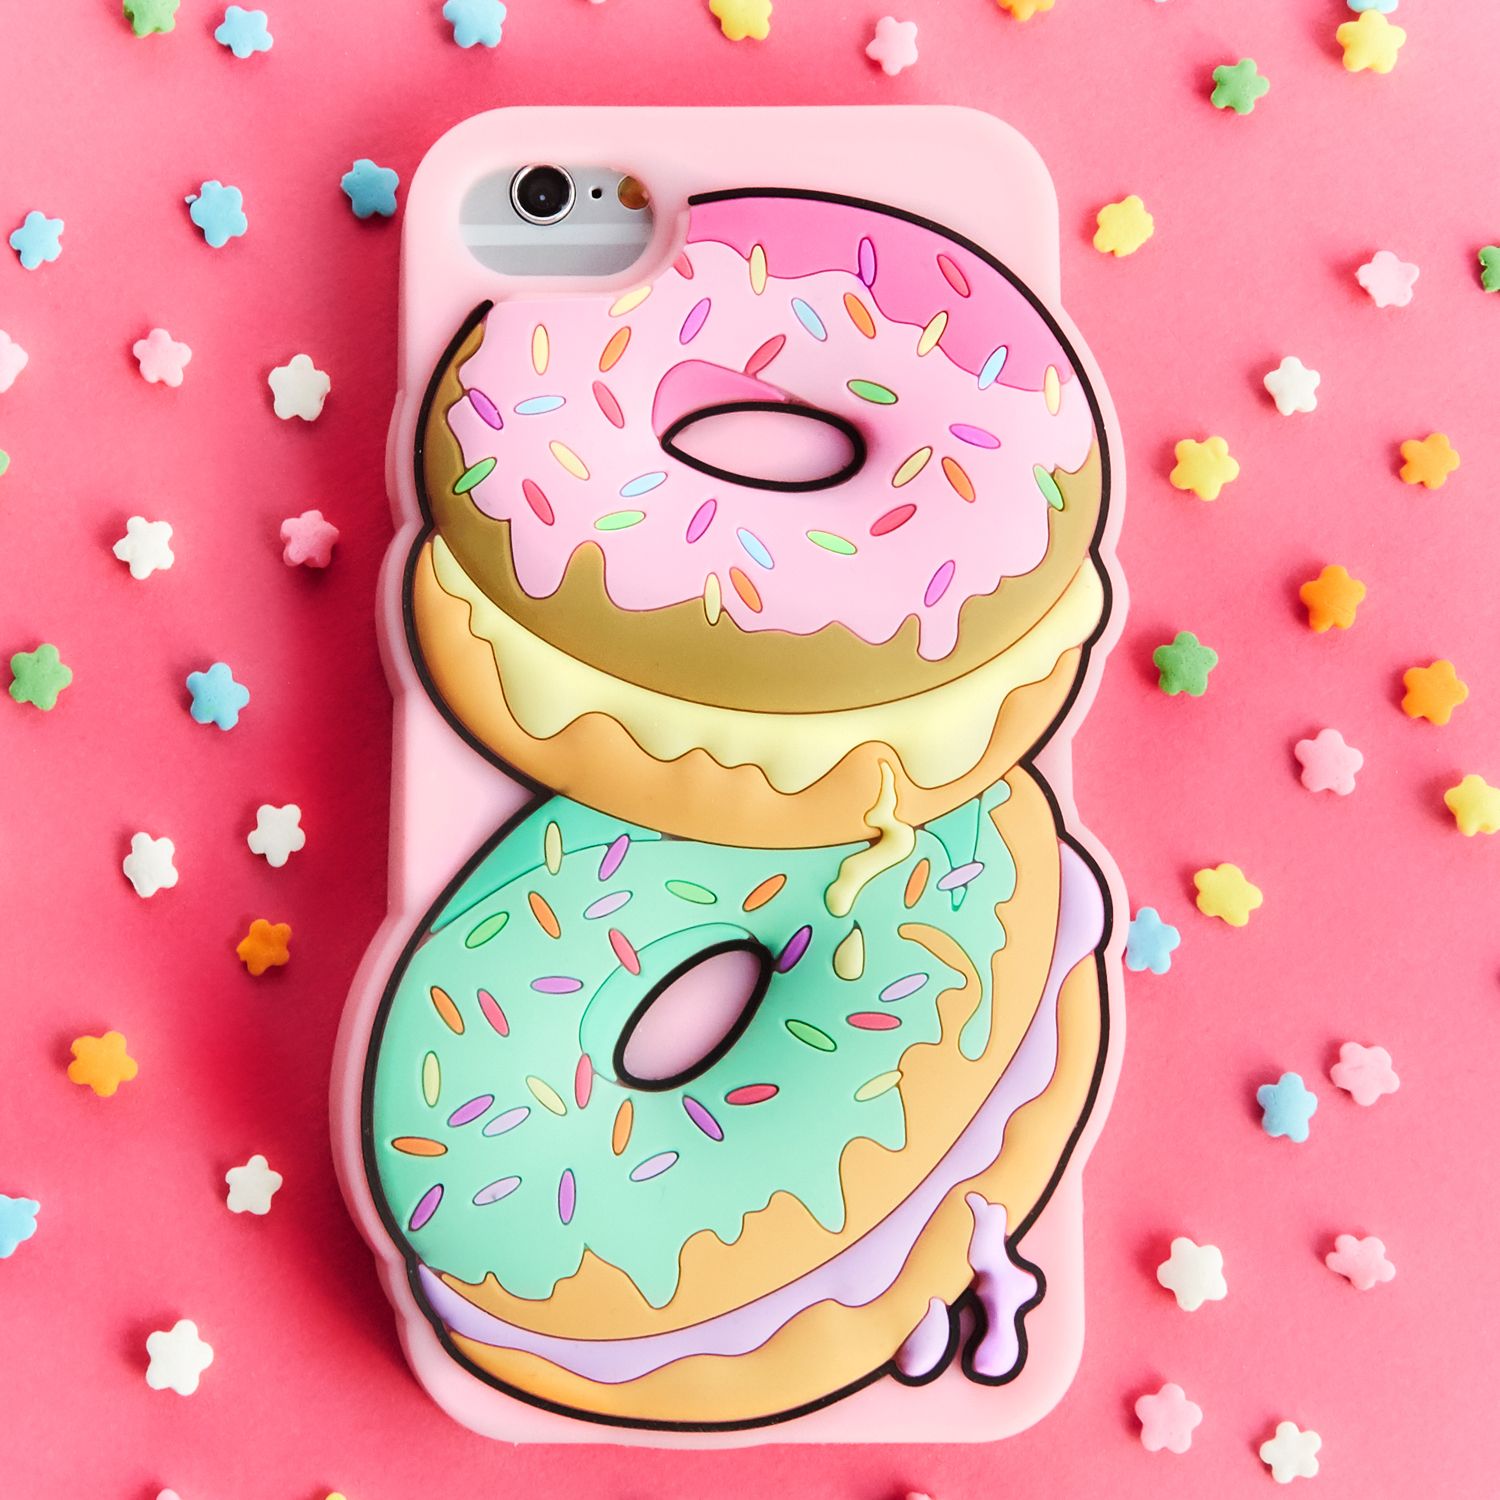 Phone Cases And Cute